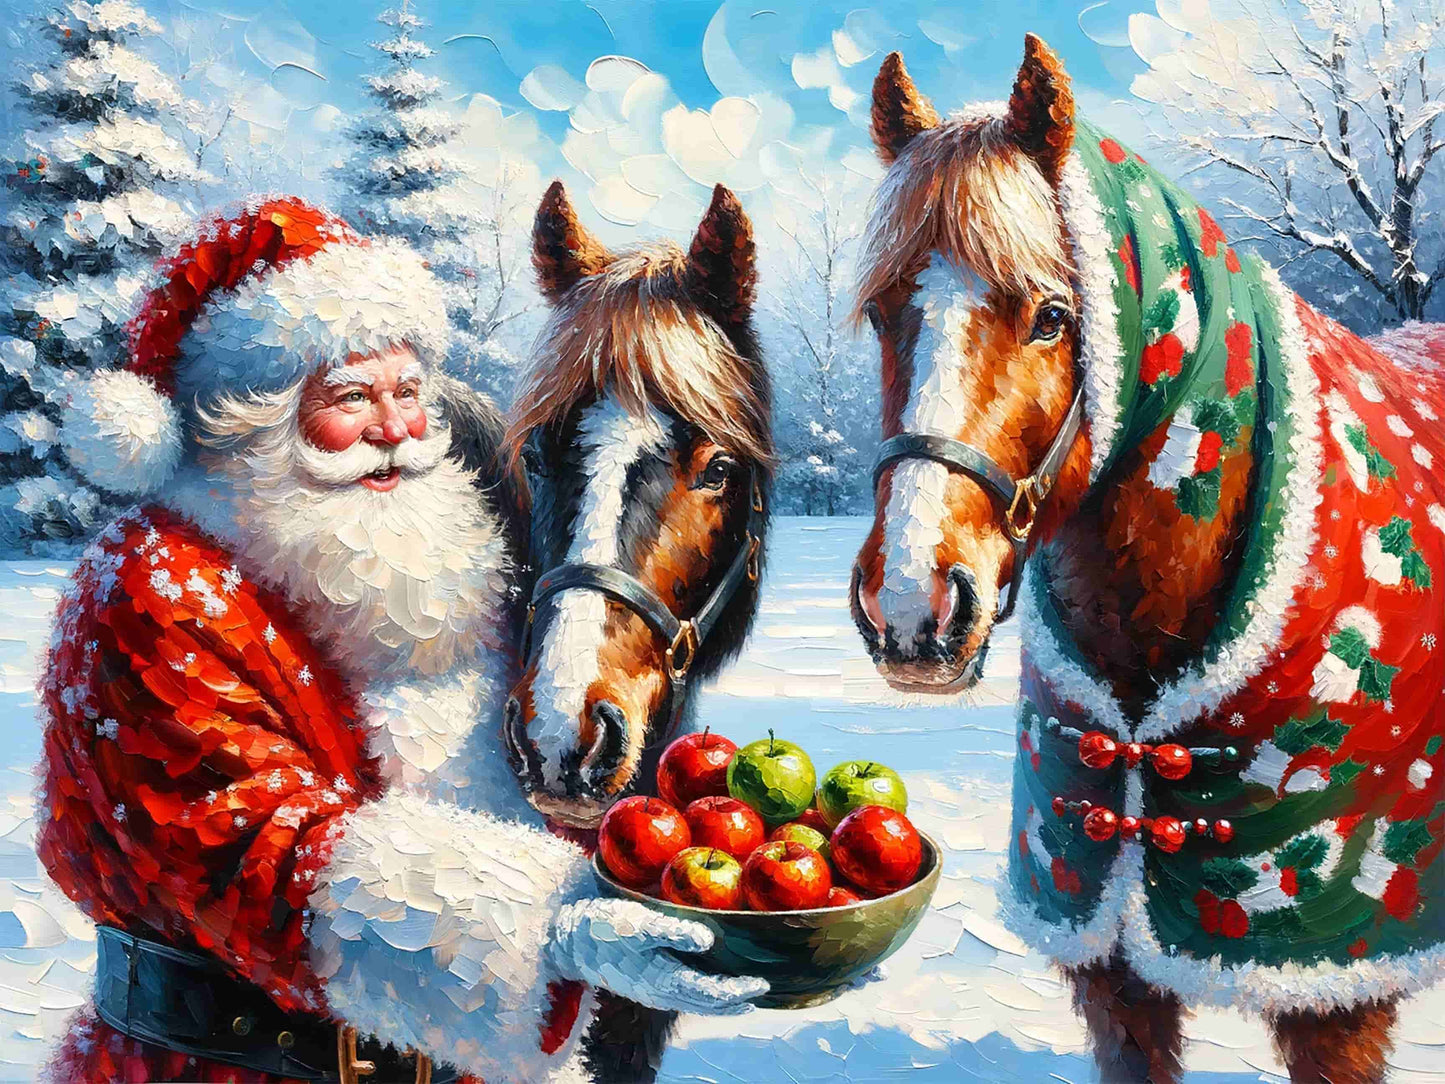 "Winter's Gentle Feast - Santa Claus with Festive Horses" Wrapped  Canvas wall Art Prints